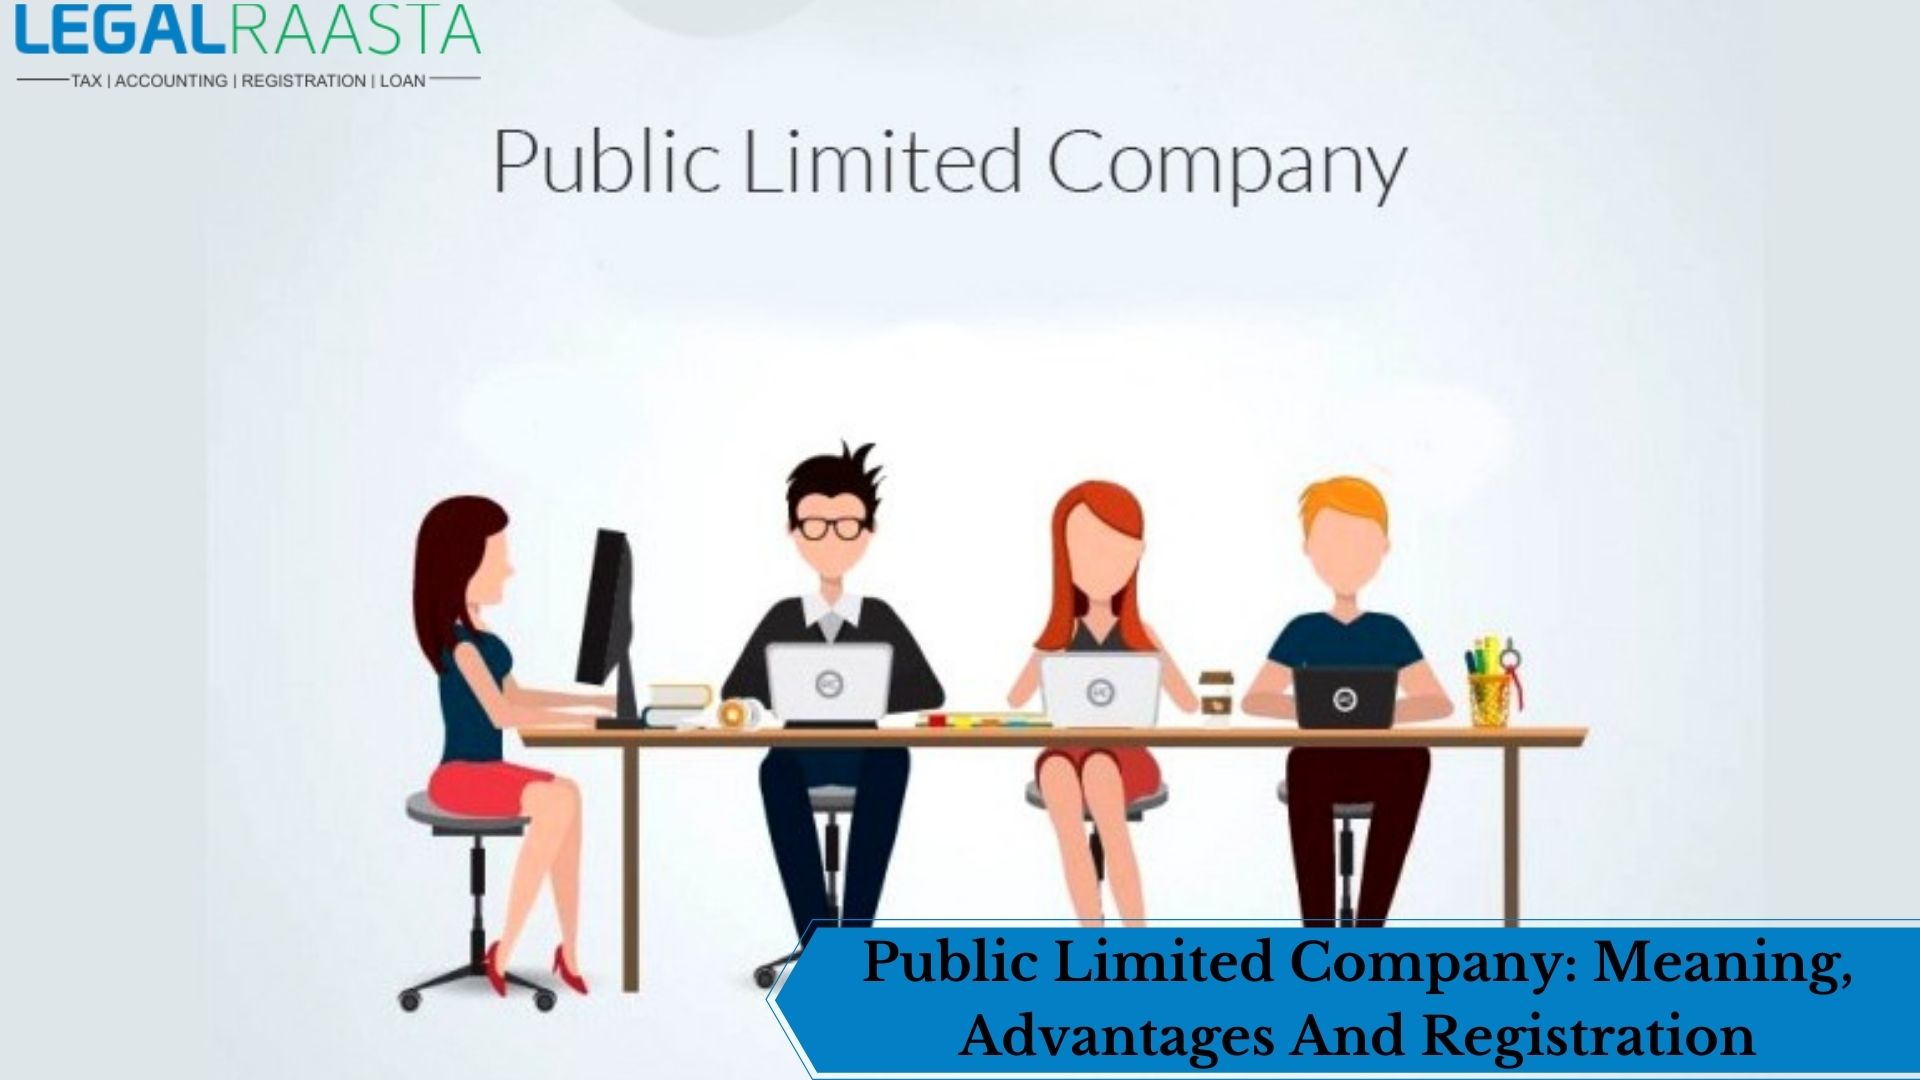 Public Limited Company: Meaning, Advantages And Registration